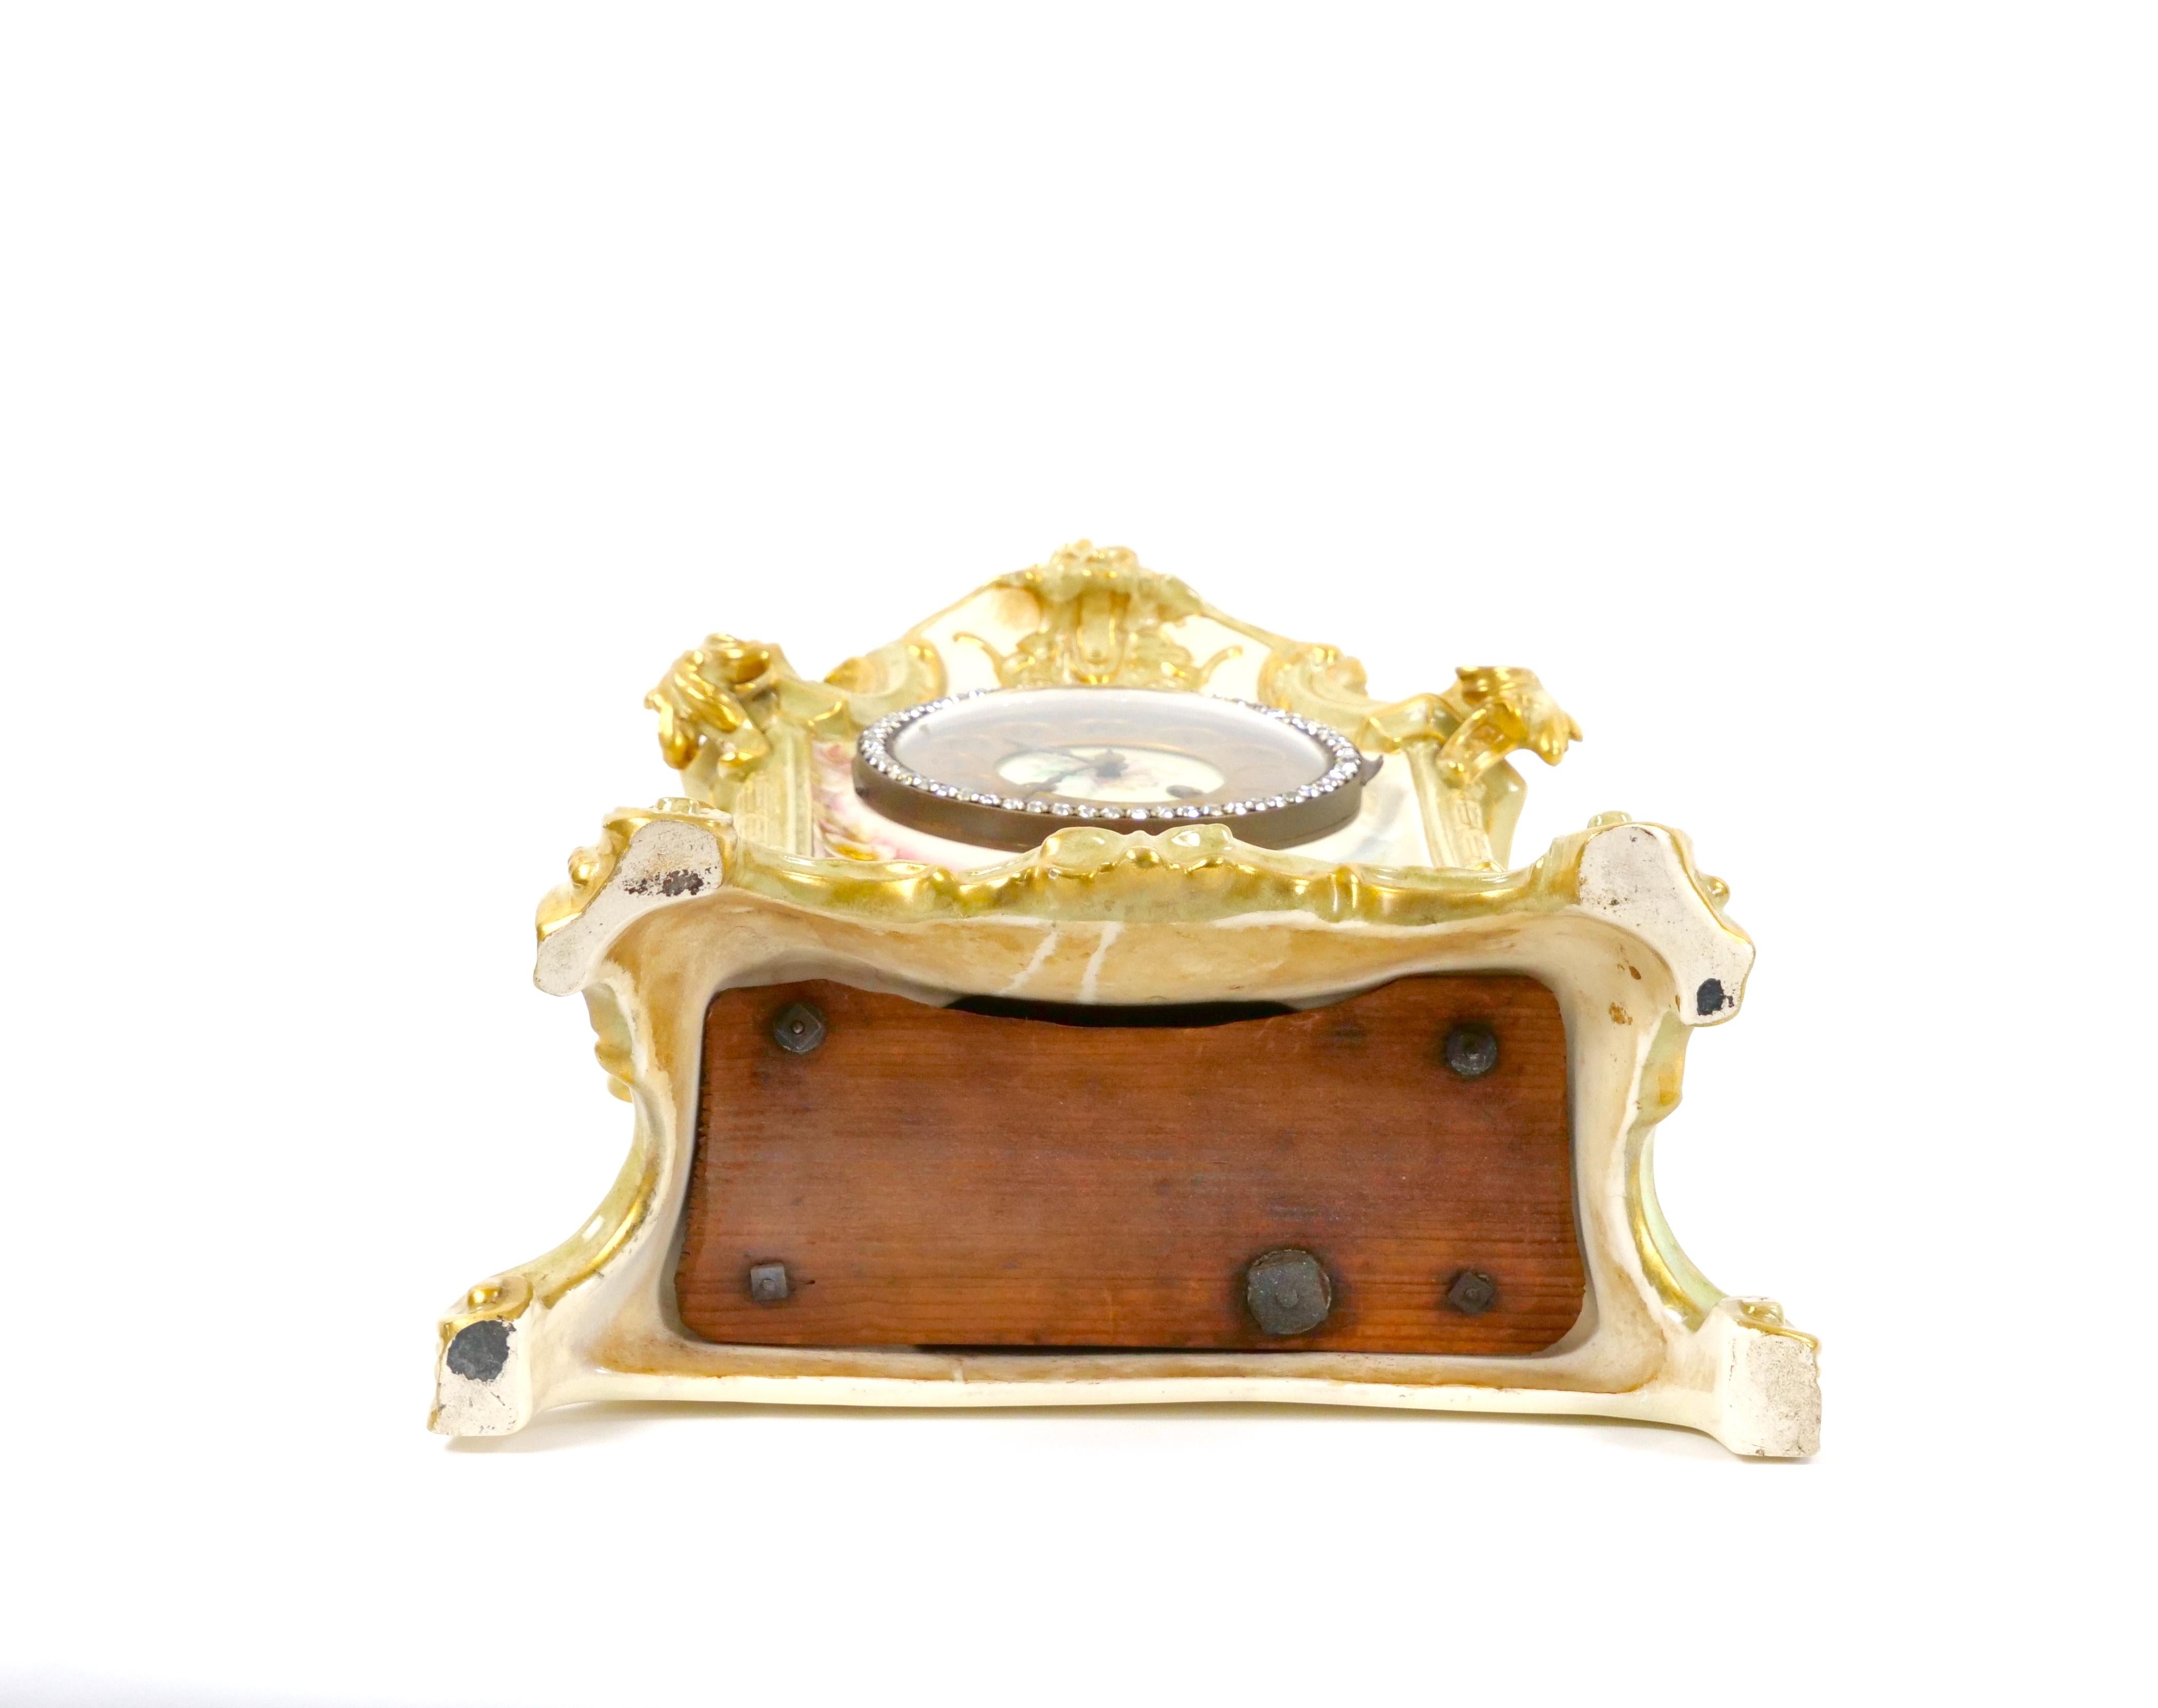 19th Century French Hand Painted/Gilt Decorated Porcelain Mantel Clock 11